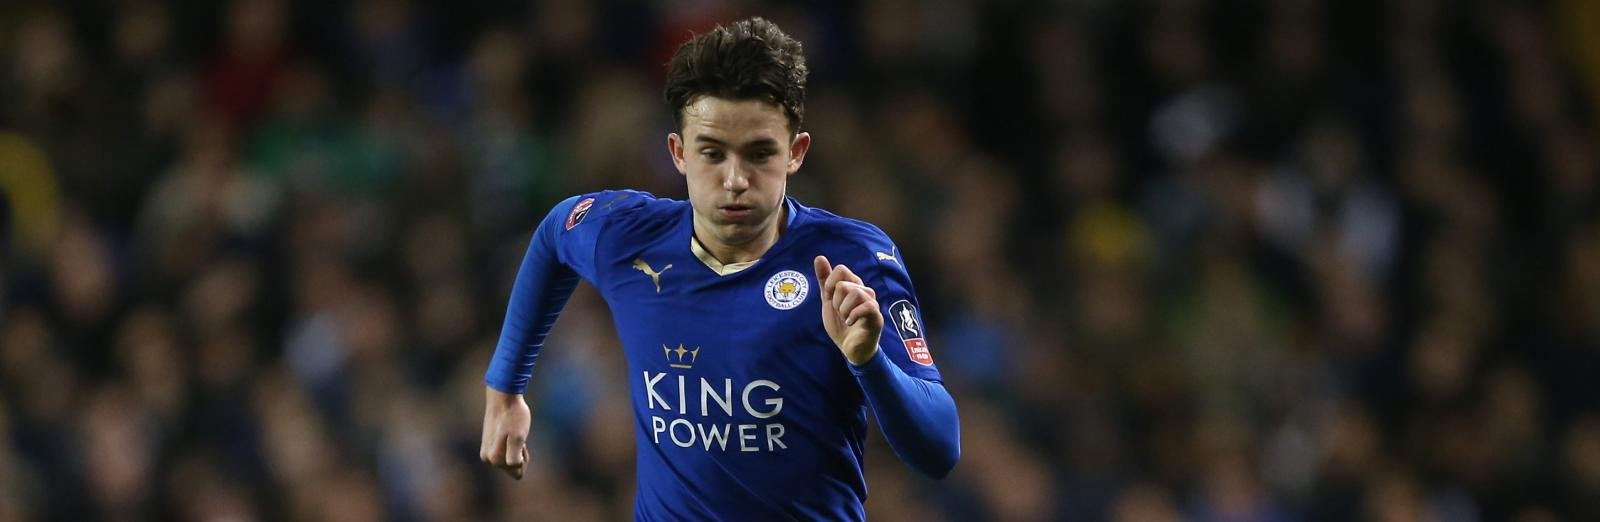 Liverpool prepared to bid £8m to beat Arsenal to Leicester City’s 19-year-old star